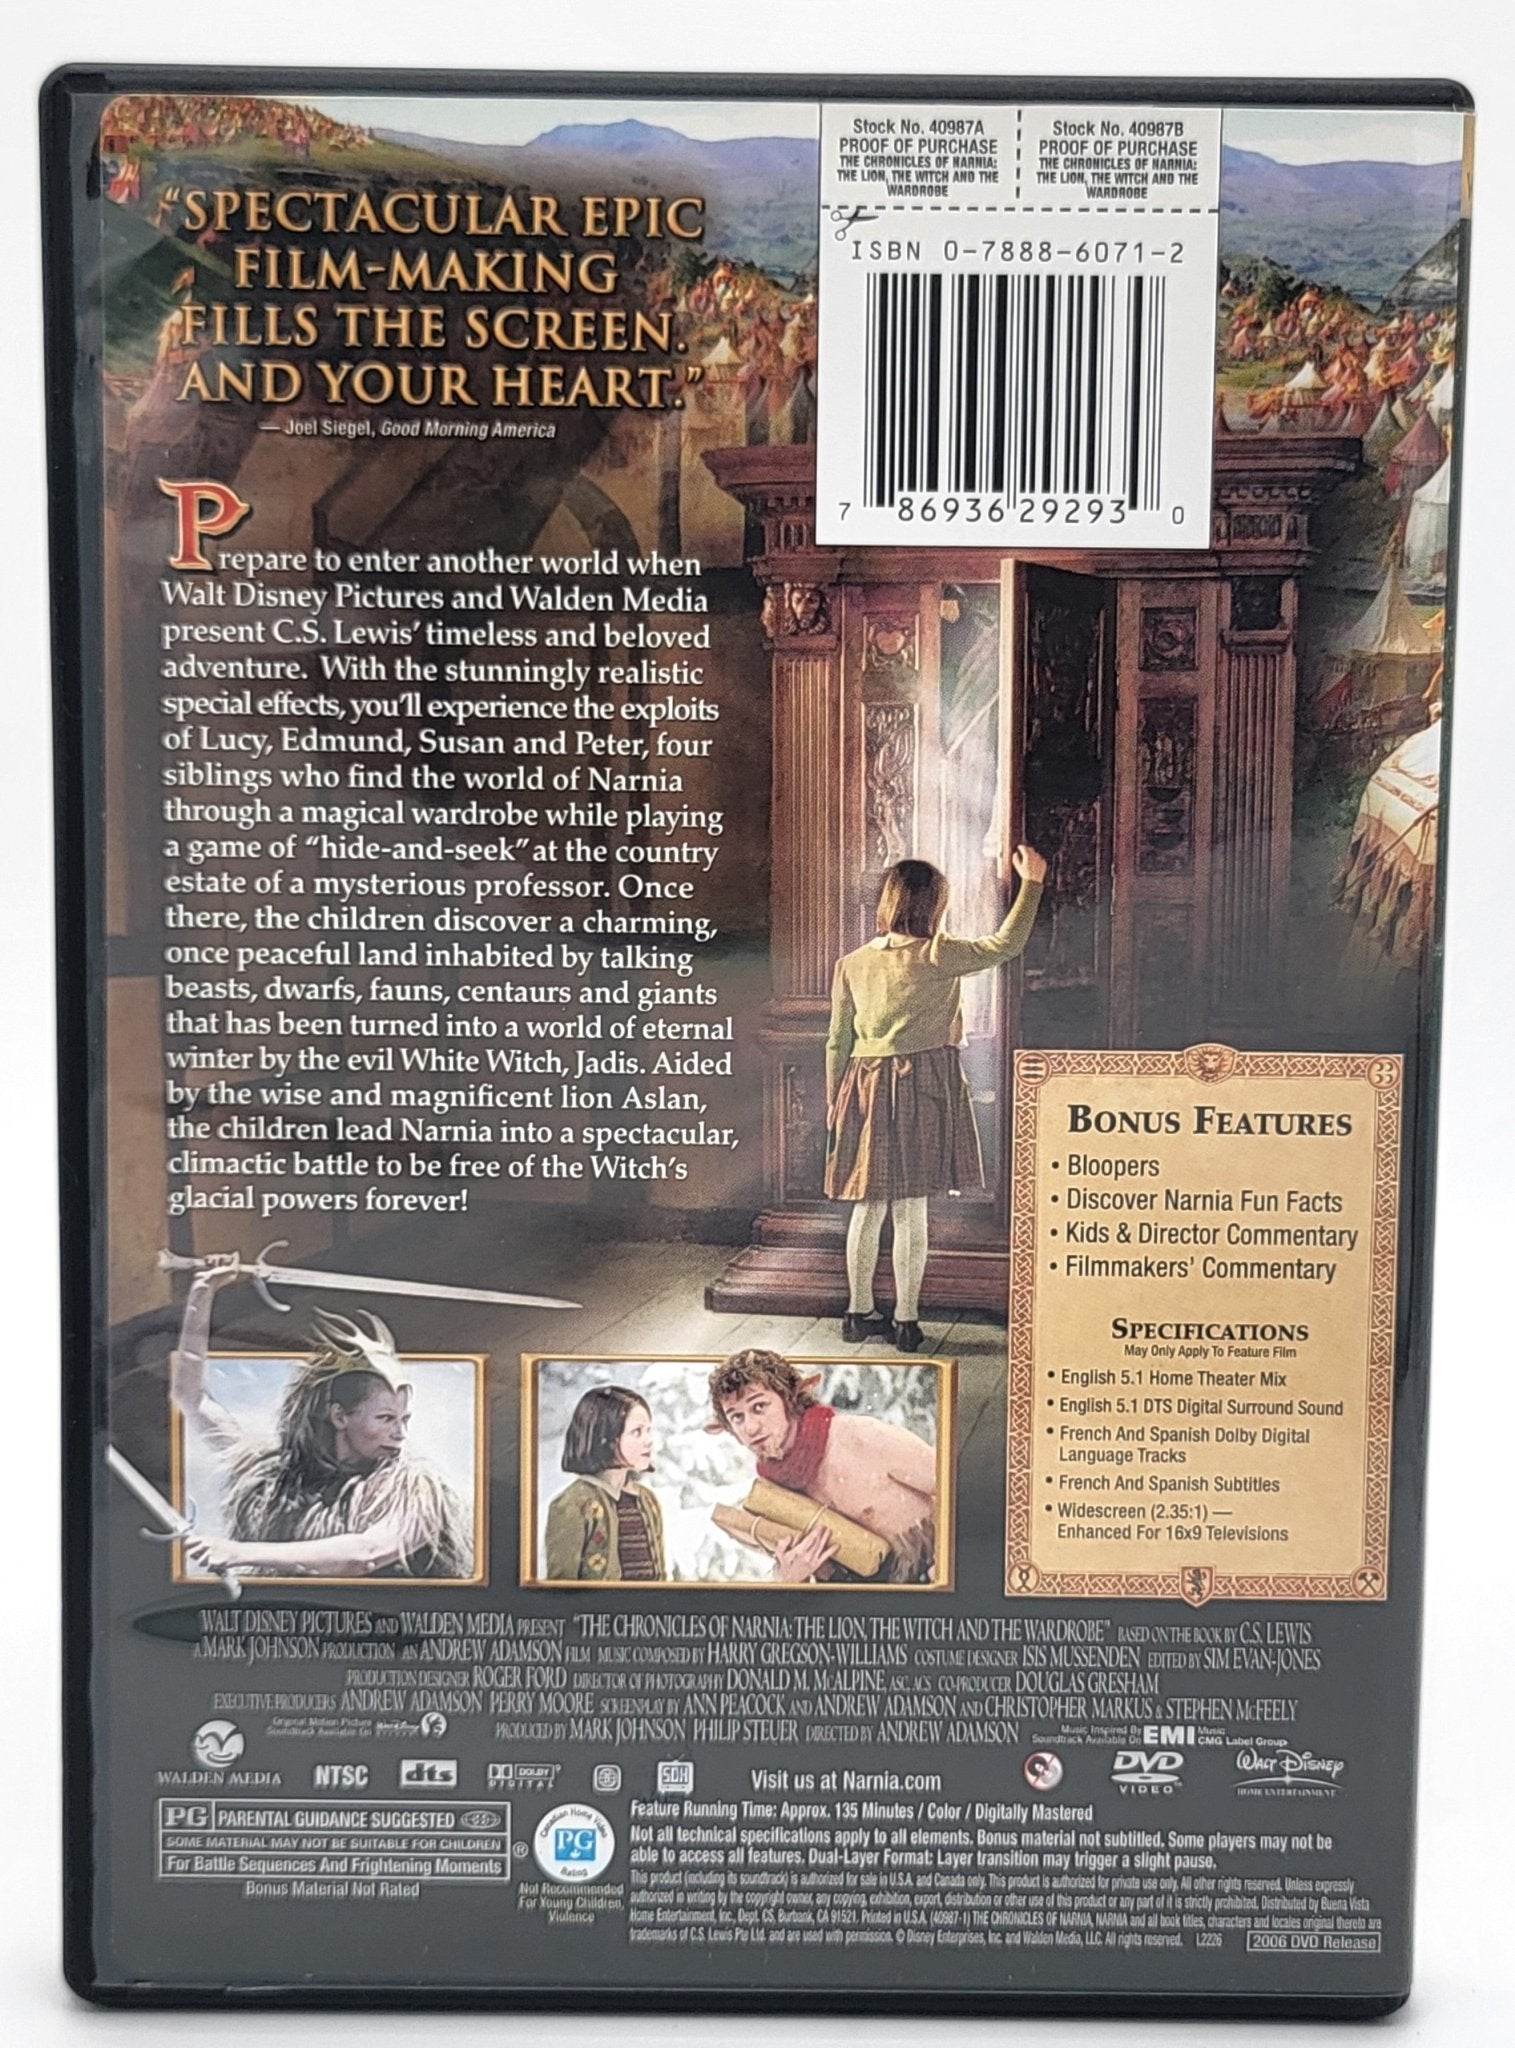 Walt Disney Pictures - The Chronicles of Narnia the Lion the Witch and The Wardrobe | DVD | Widescreen - DVD - Steady Bunny Shop